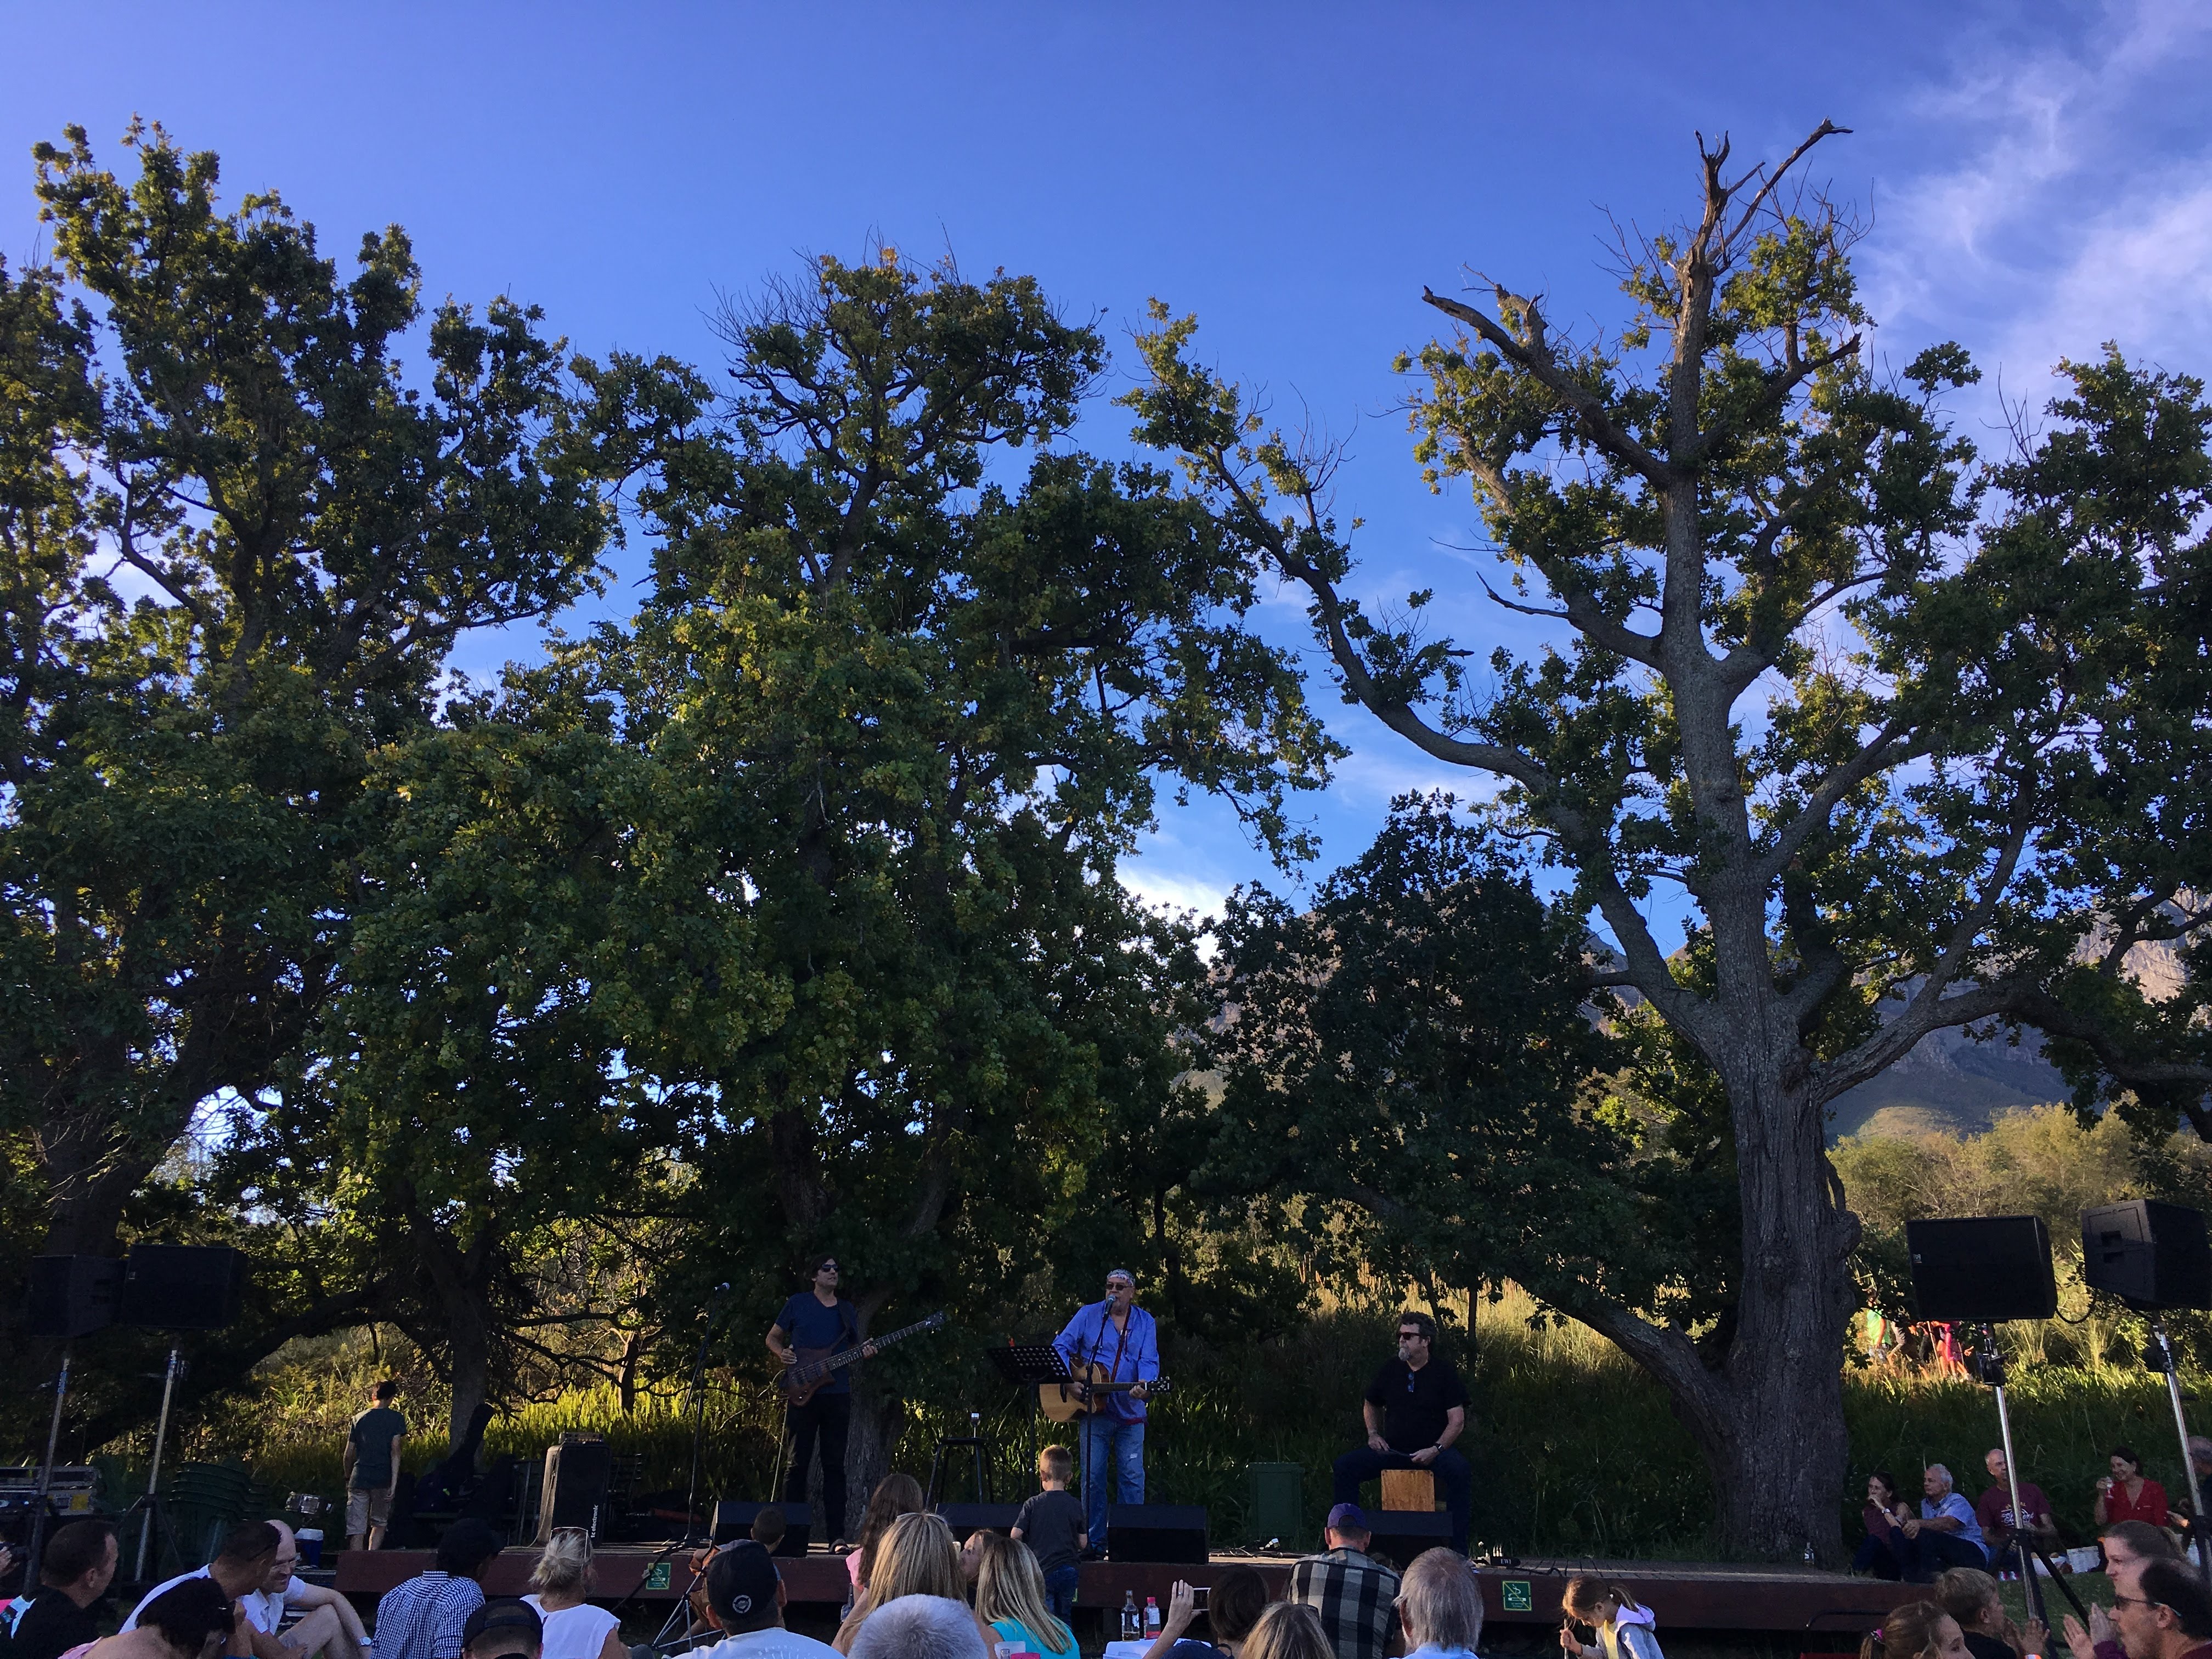 The legendary Koos Kombuis (aka André Letoit) performing with Schalk Joubert on bass and Vernon Swart on percussion in the Helderberg Nature reserve, eponymous mountain visible through the trees on the right. This was a surprisingly amazing end to the week.